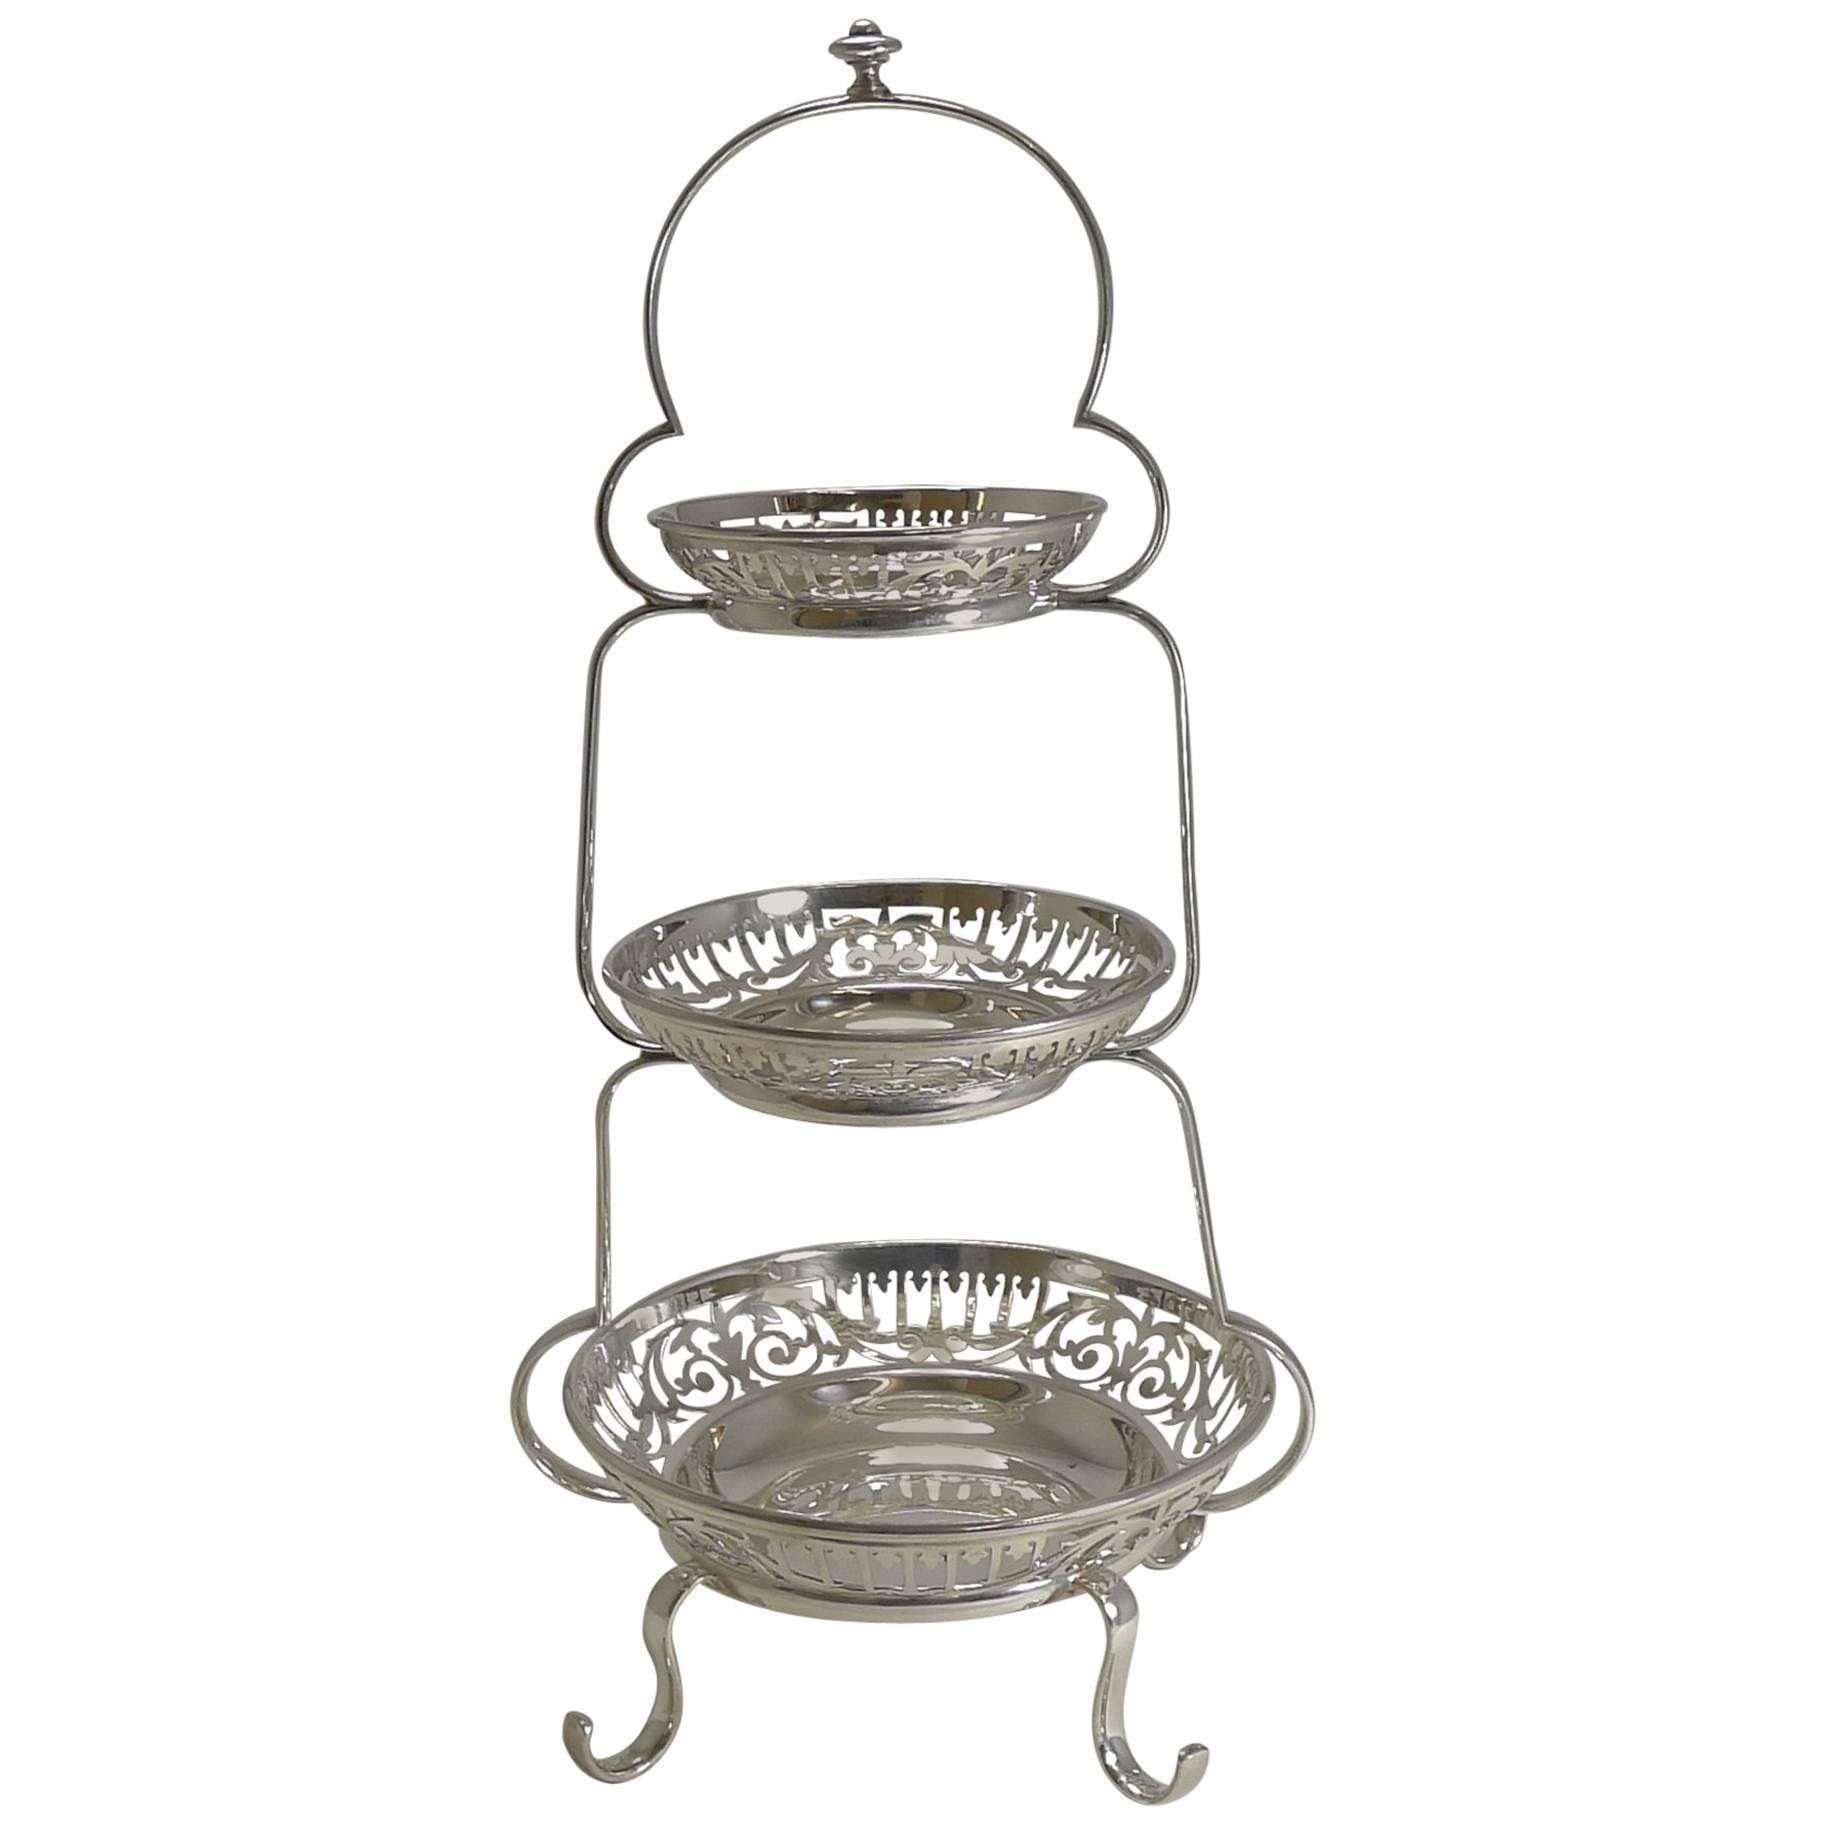 Antique English Silver Plated Graduated Cake Stand, circa 1900